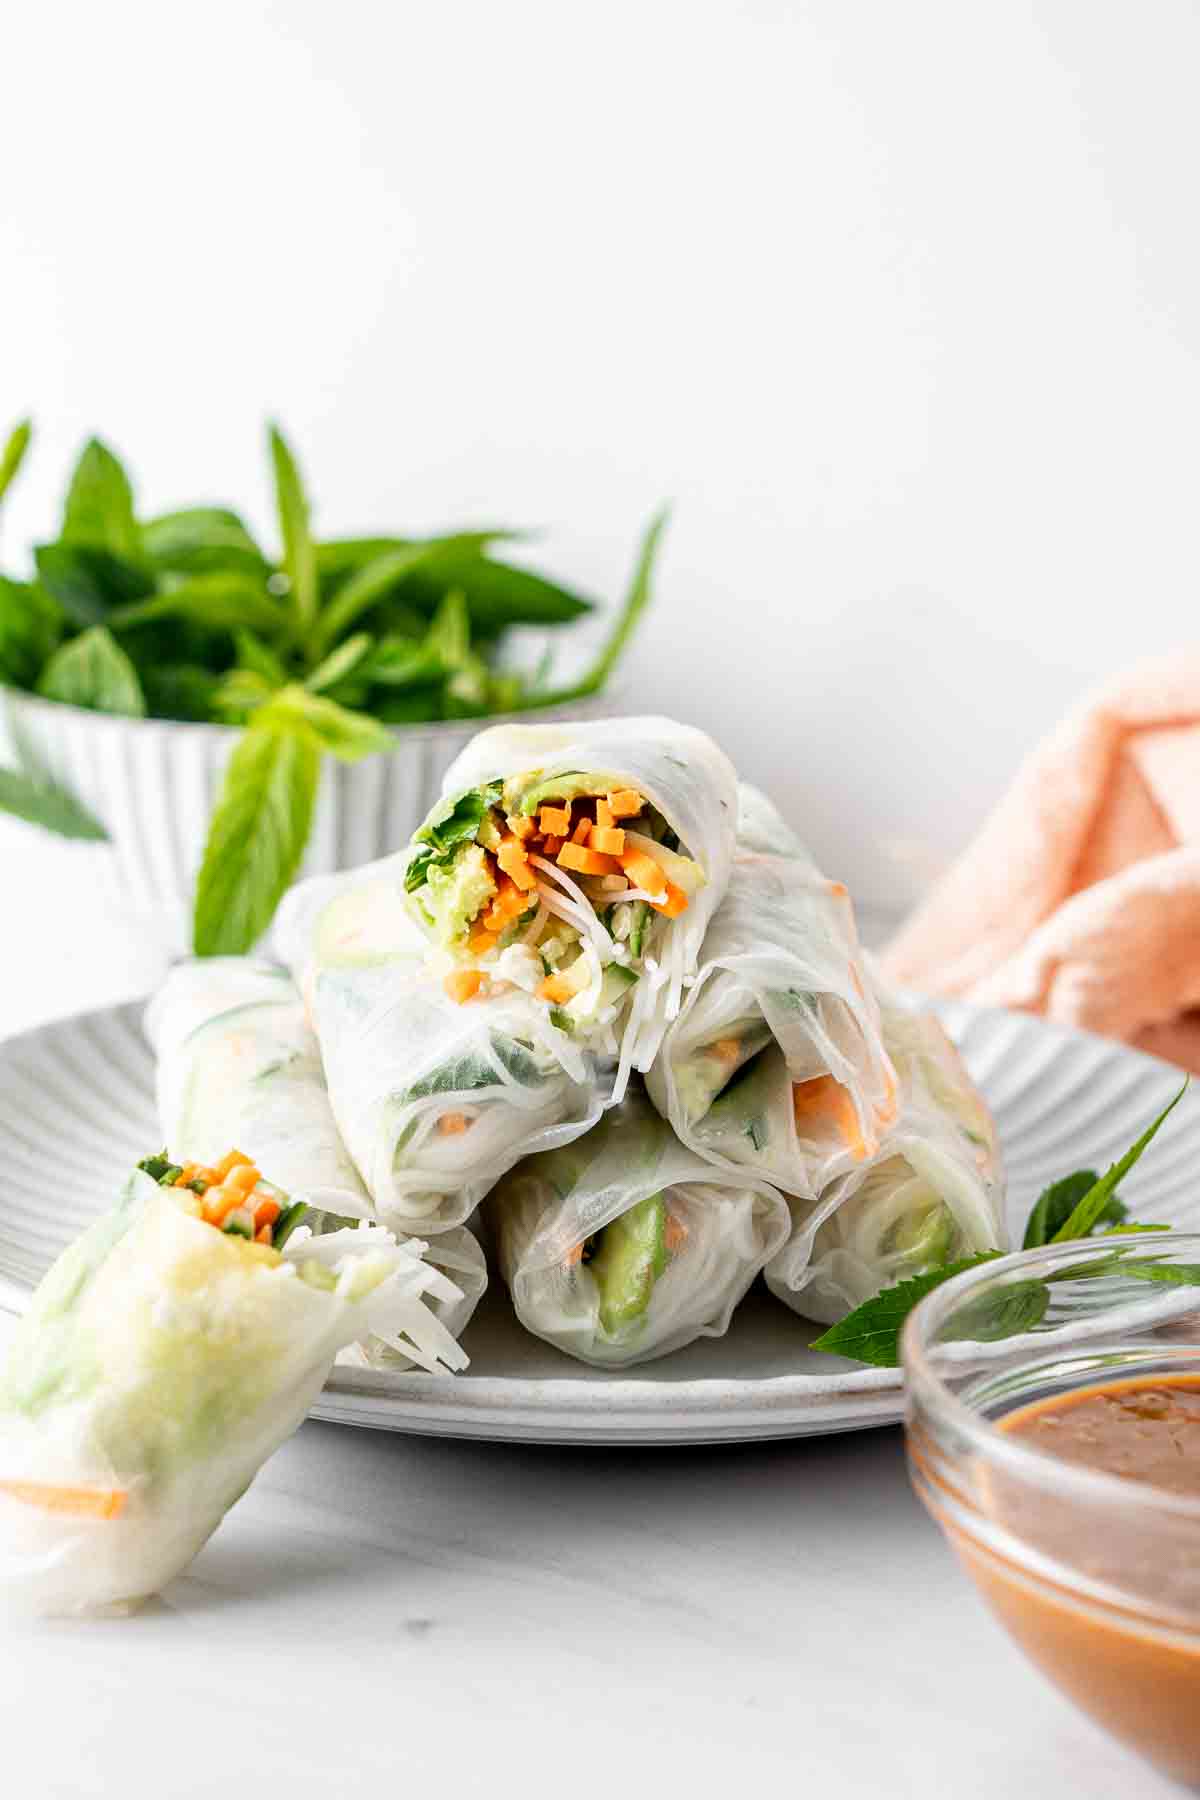 Rice paper rolls on a white plate.